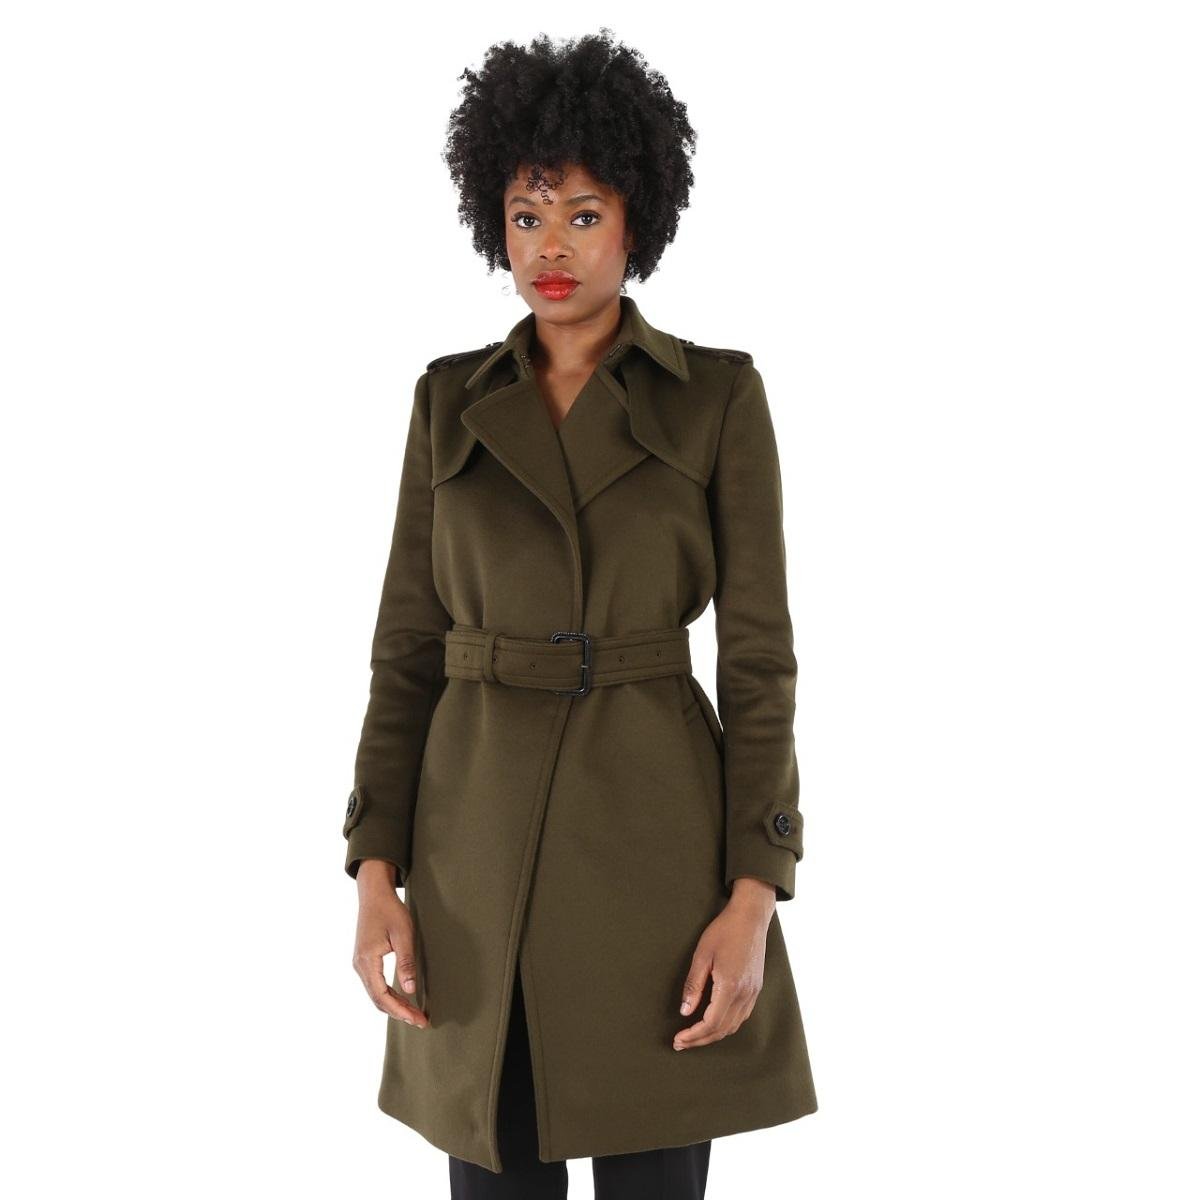 Burberry Ladies Dark Olive Tempsford Single-Breasted Trench Coat by BURBERRY